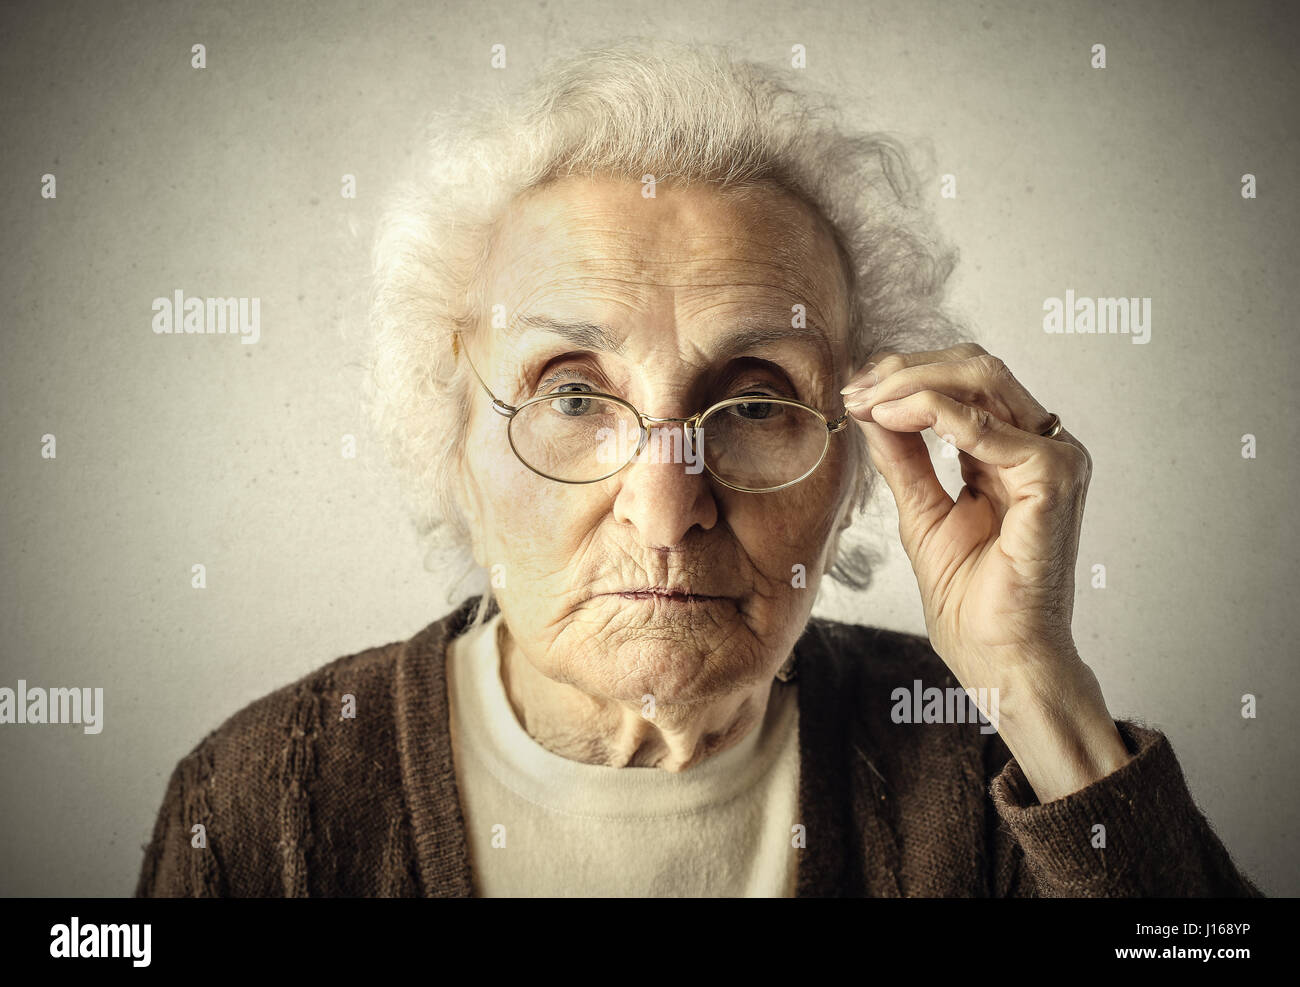 Old lady with glasses Stock Photo